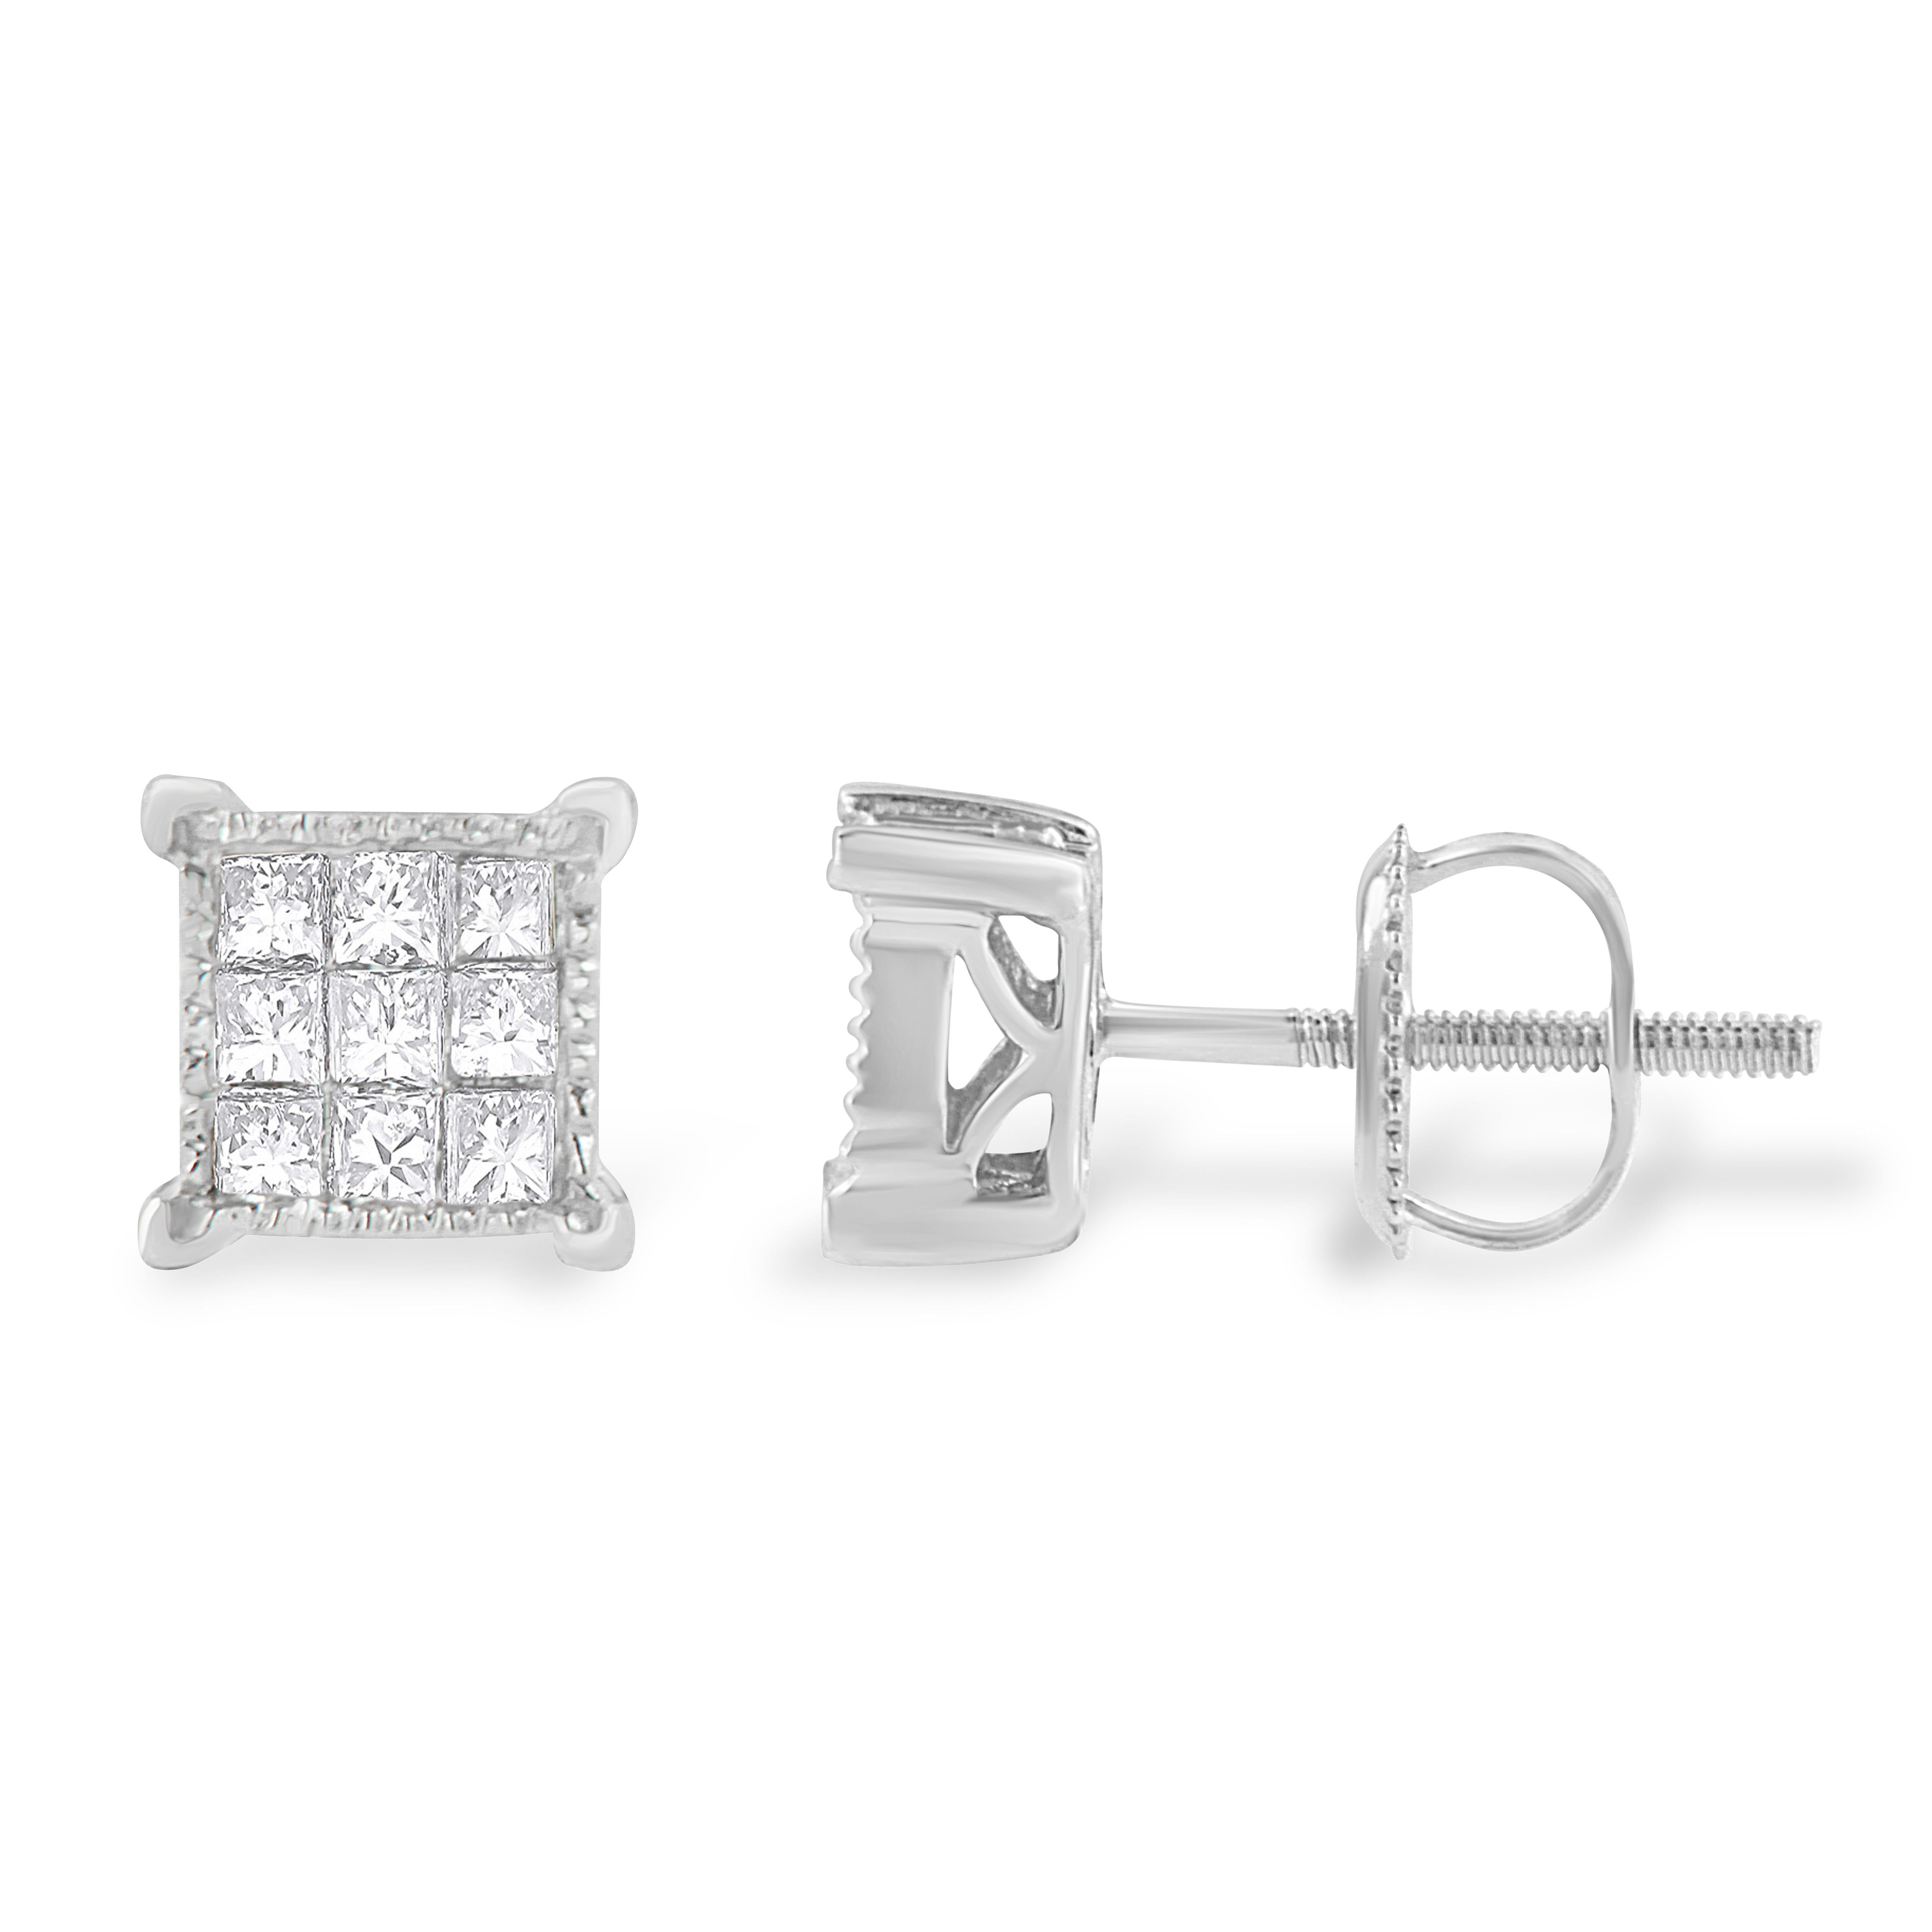 You will love these classic square stud earrings. A must have for any serious jewelry collection, these 10k white gold earrings boast a 1/3 carat total weight of sparkling diamonds. Each square stud is designed with 9 princess-cut diamonds in an